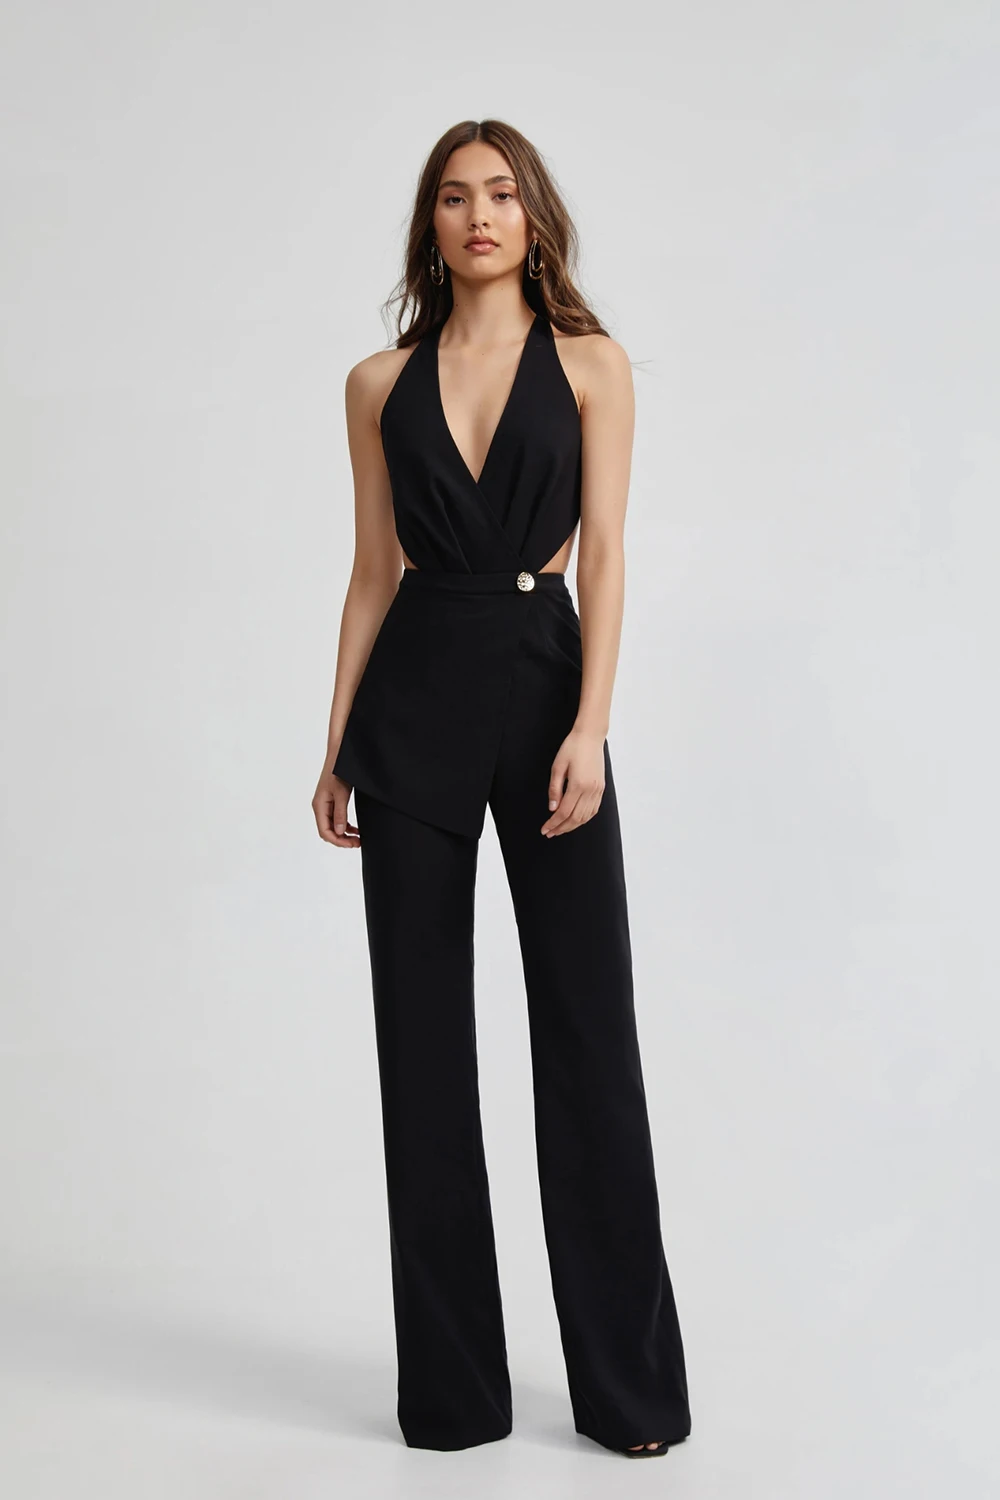 High Quality Evening Party Jumpsuits Fashion